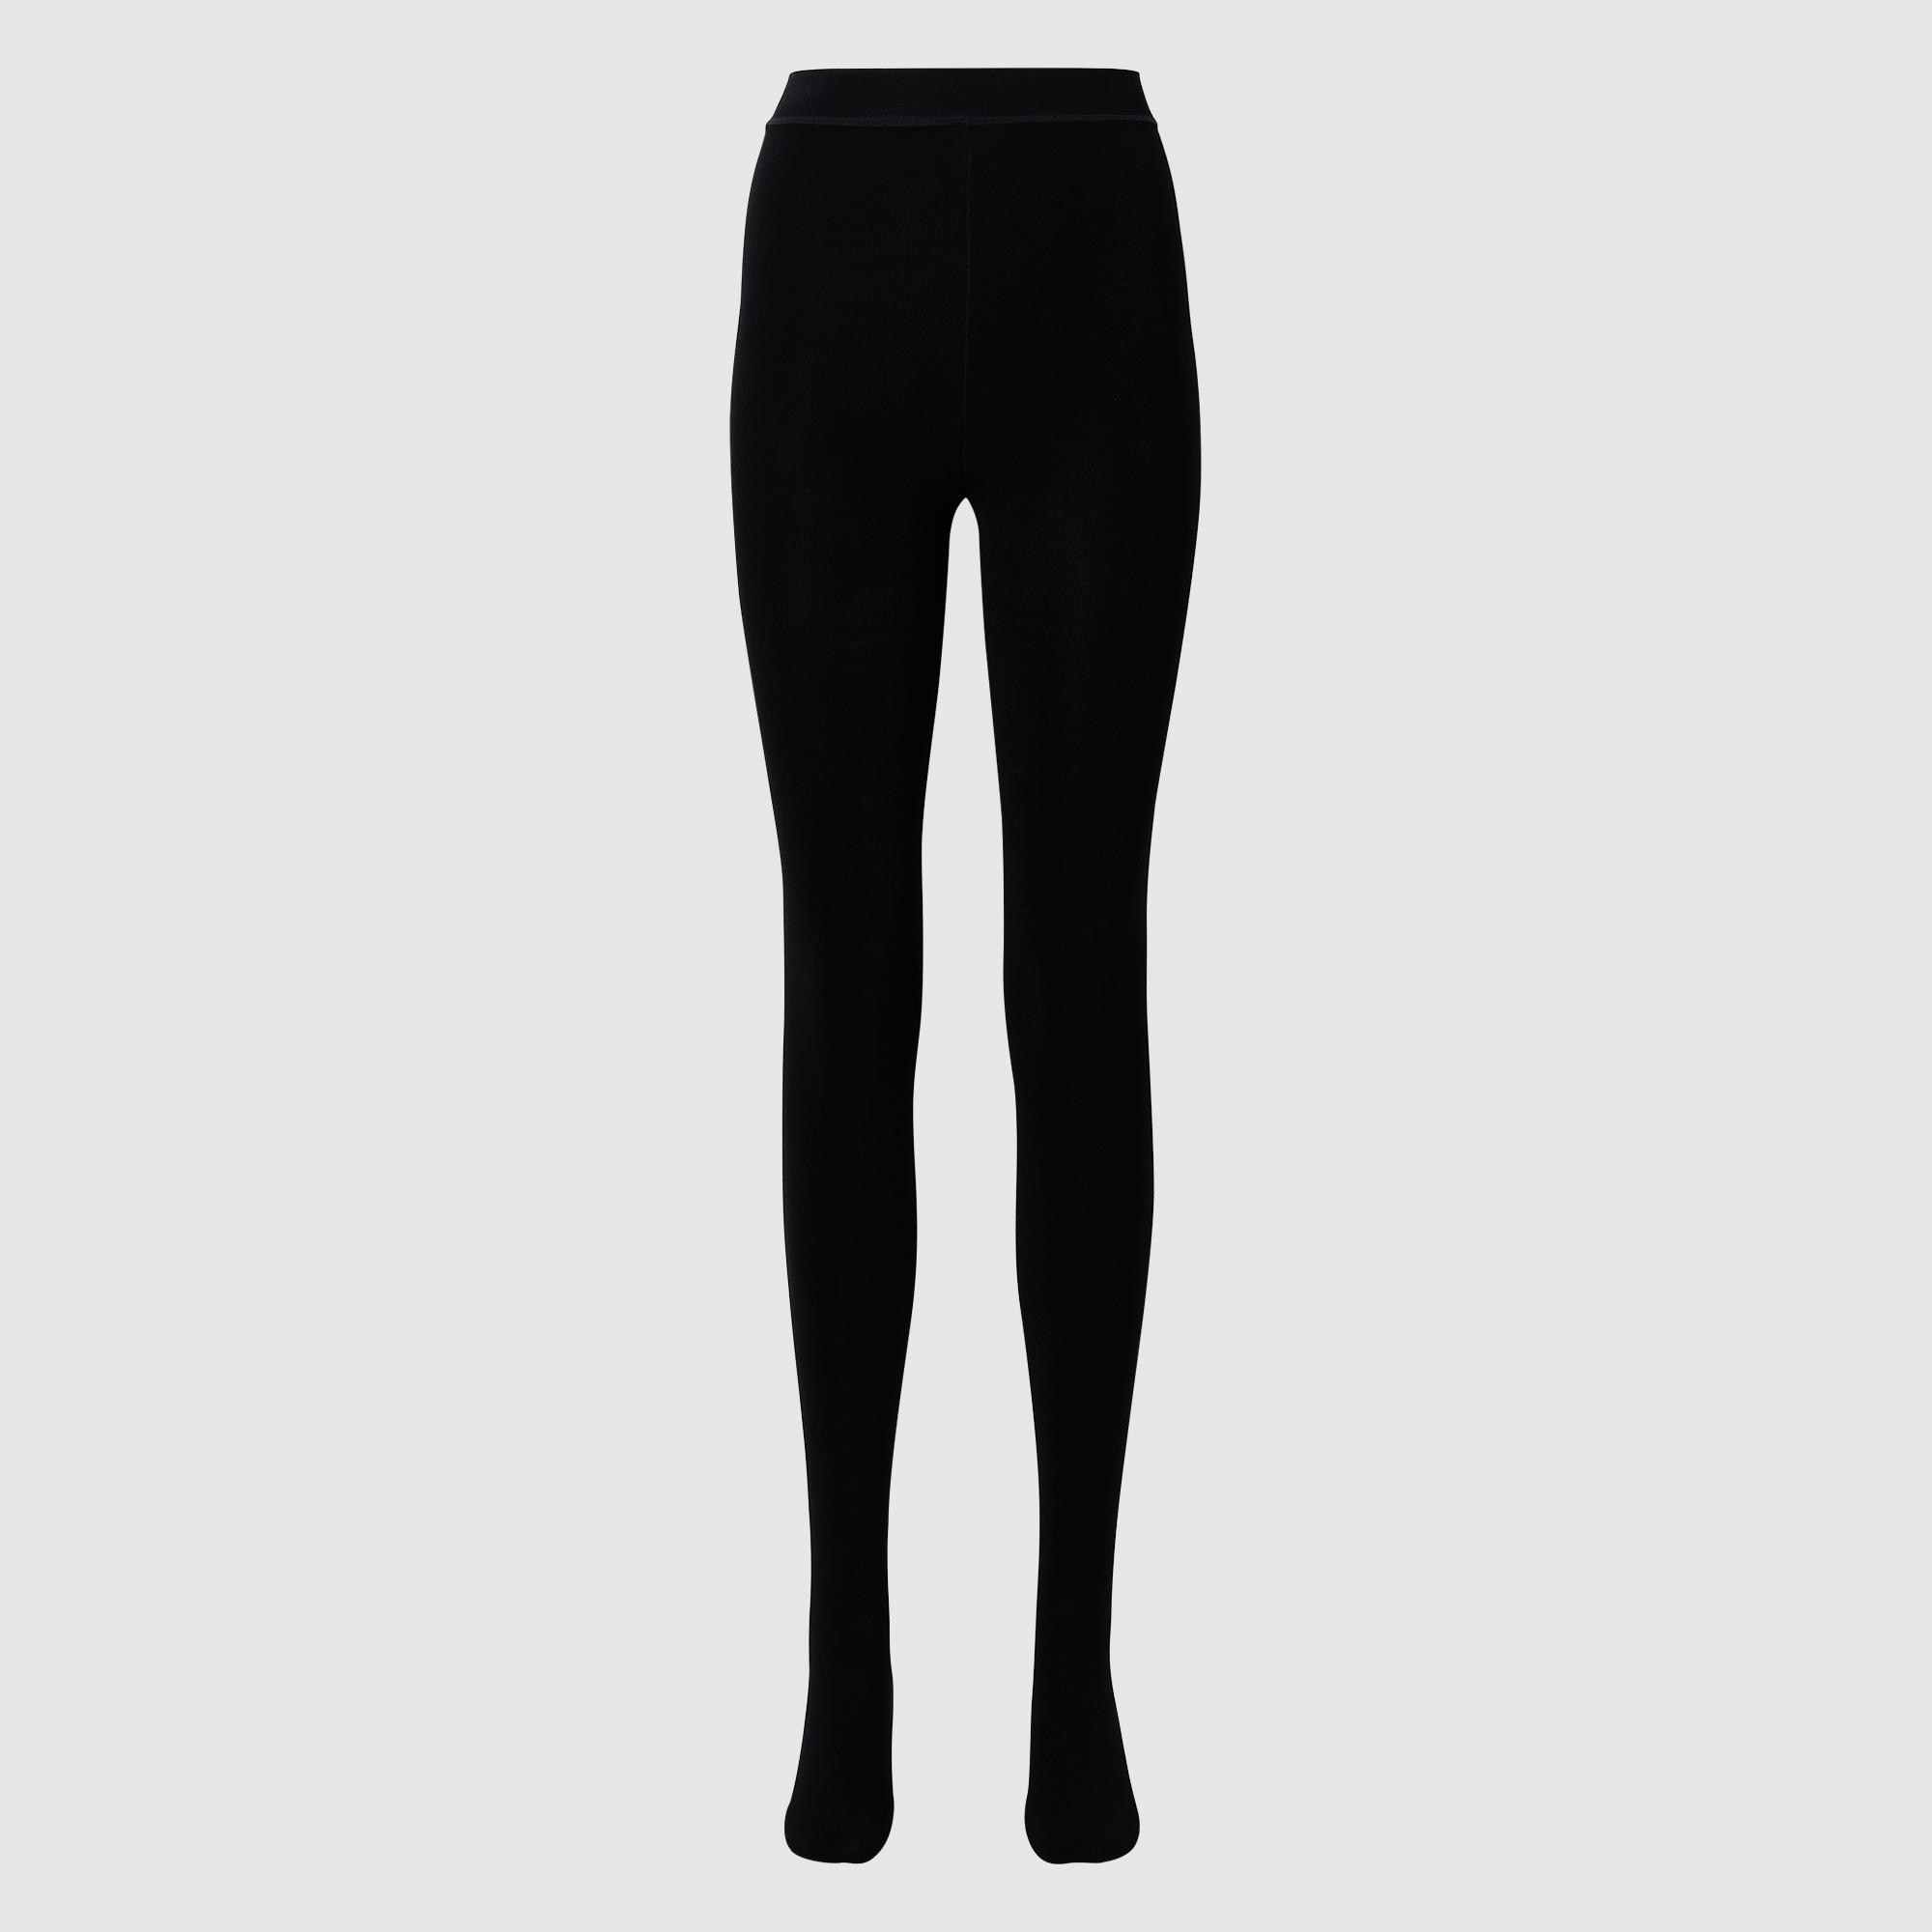 Yyeselk Fleece Lined Leggings Women Winter Thermal Business Casual High  Waisted Stretch Pull On Comfy Work Dressy Warm Pants Black Small 